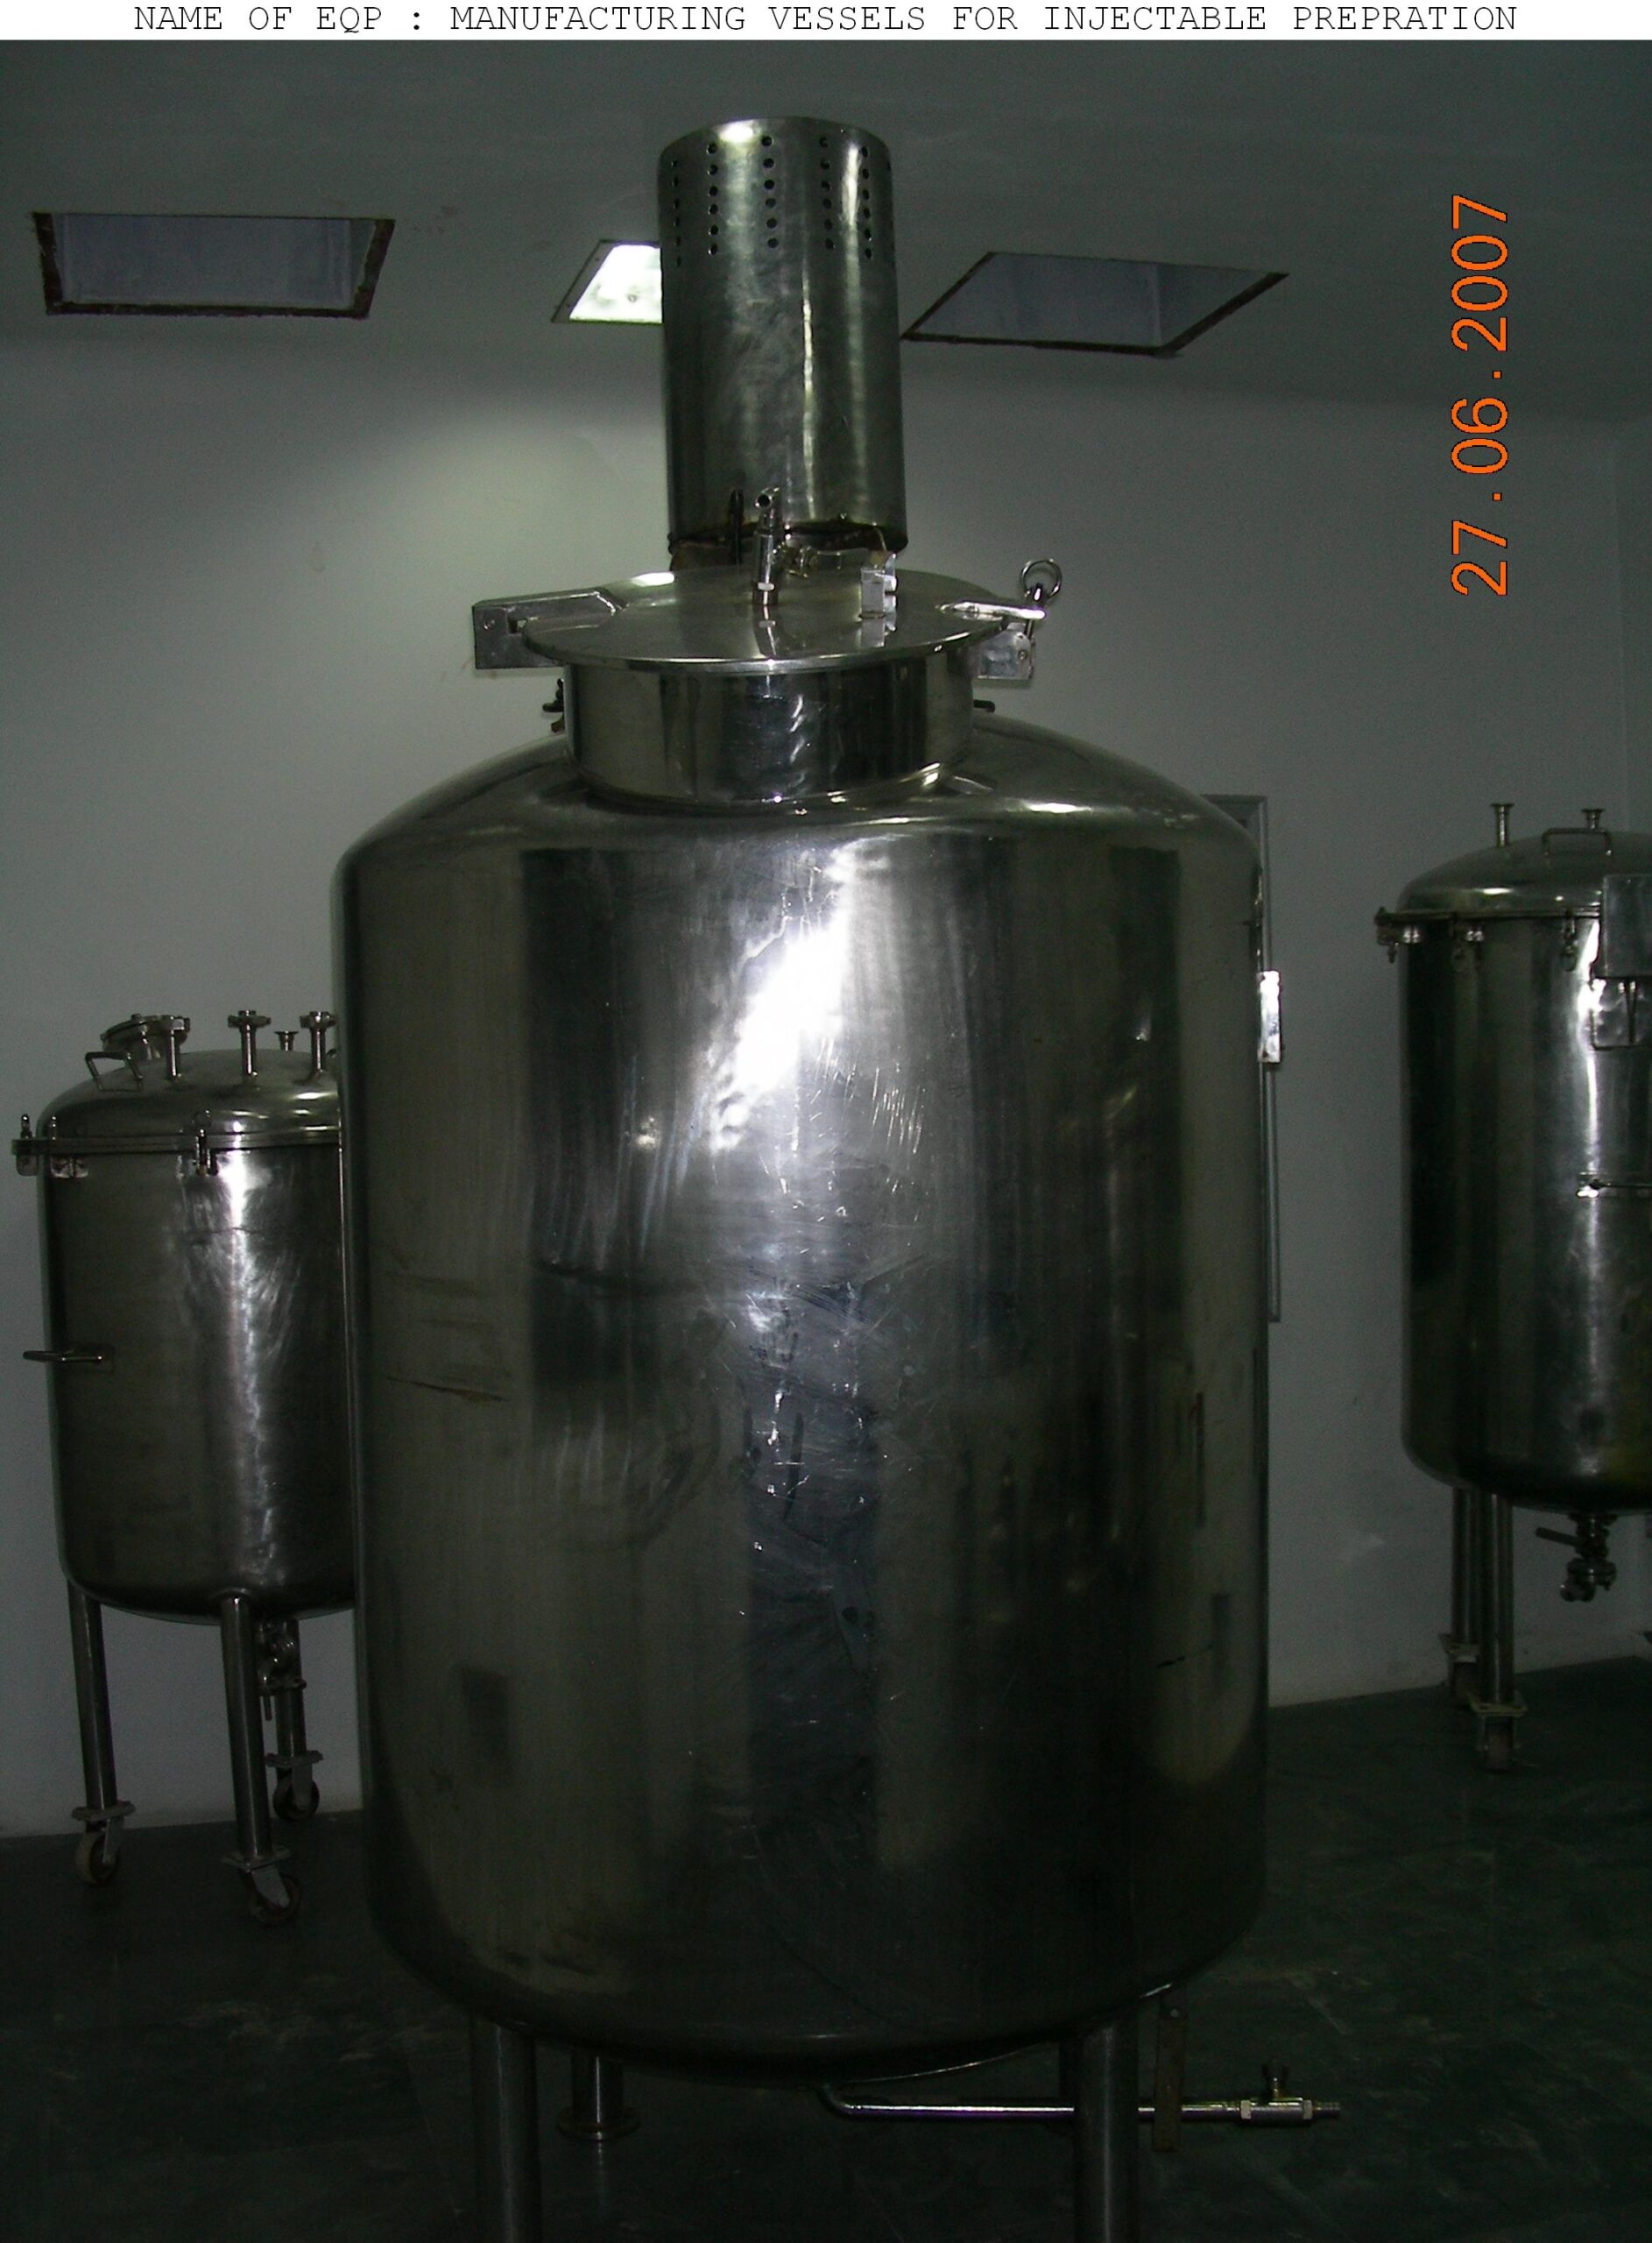 MANUFACTURING VESSELS FOR INJECTABLE PREPRATION